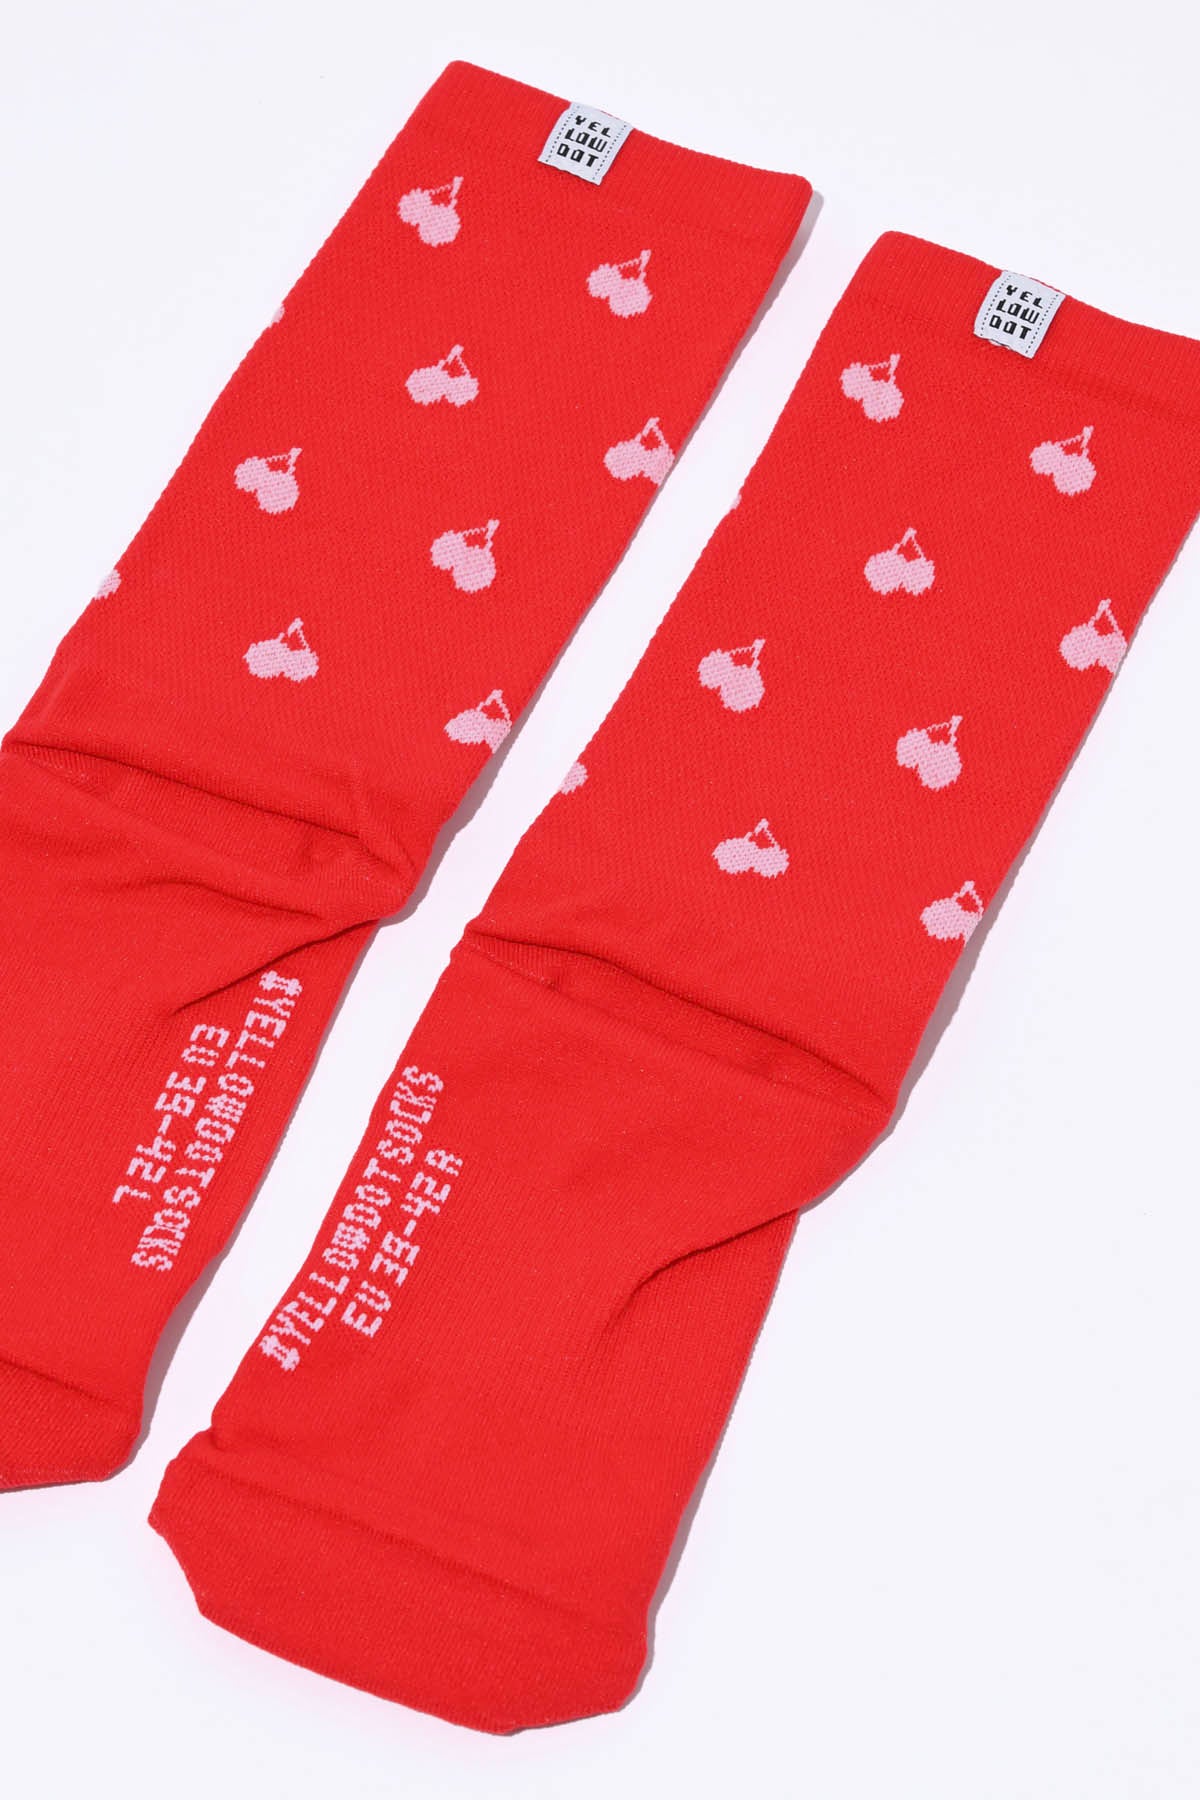 CHERRY - CANDY APPLE RED PACKSHOT | BEST CYCLING SOCKS